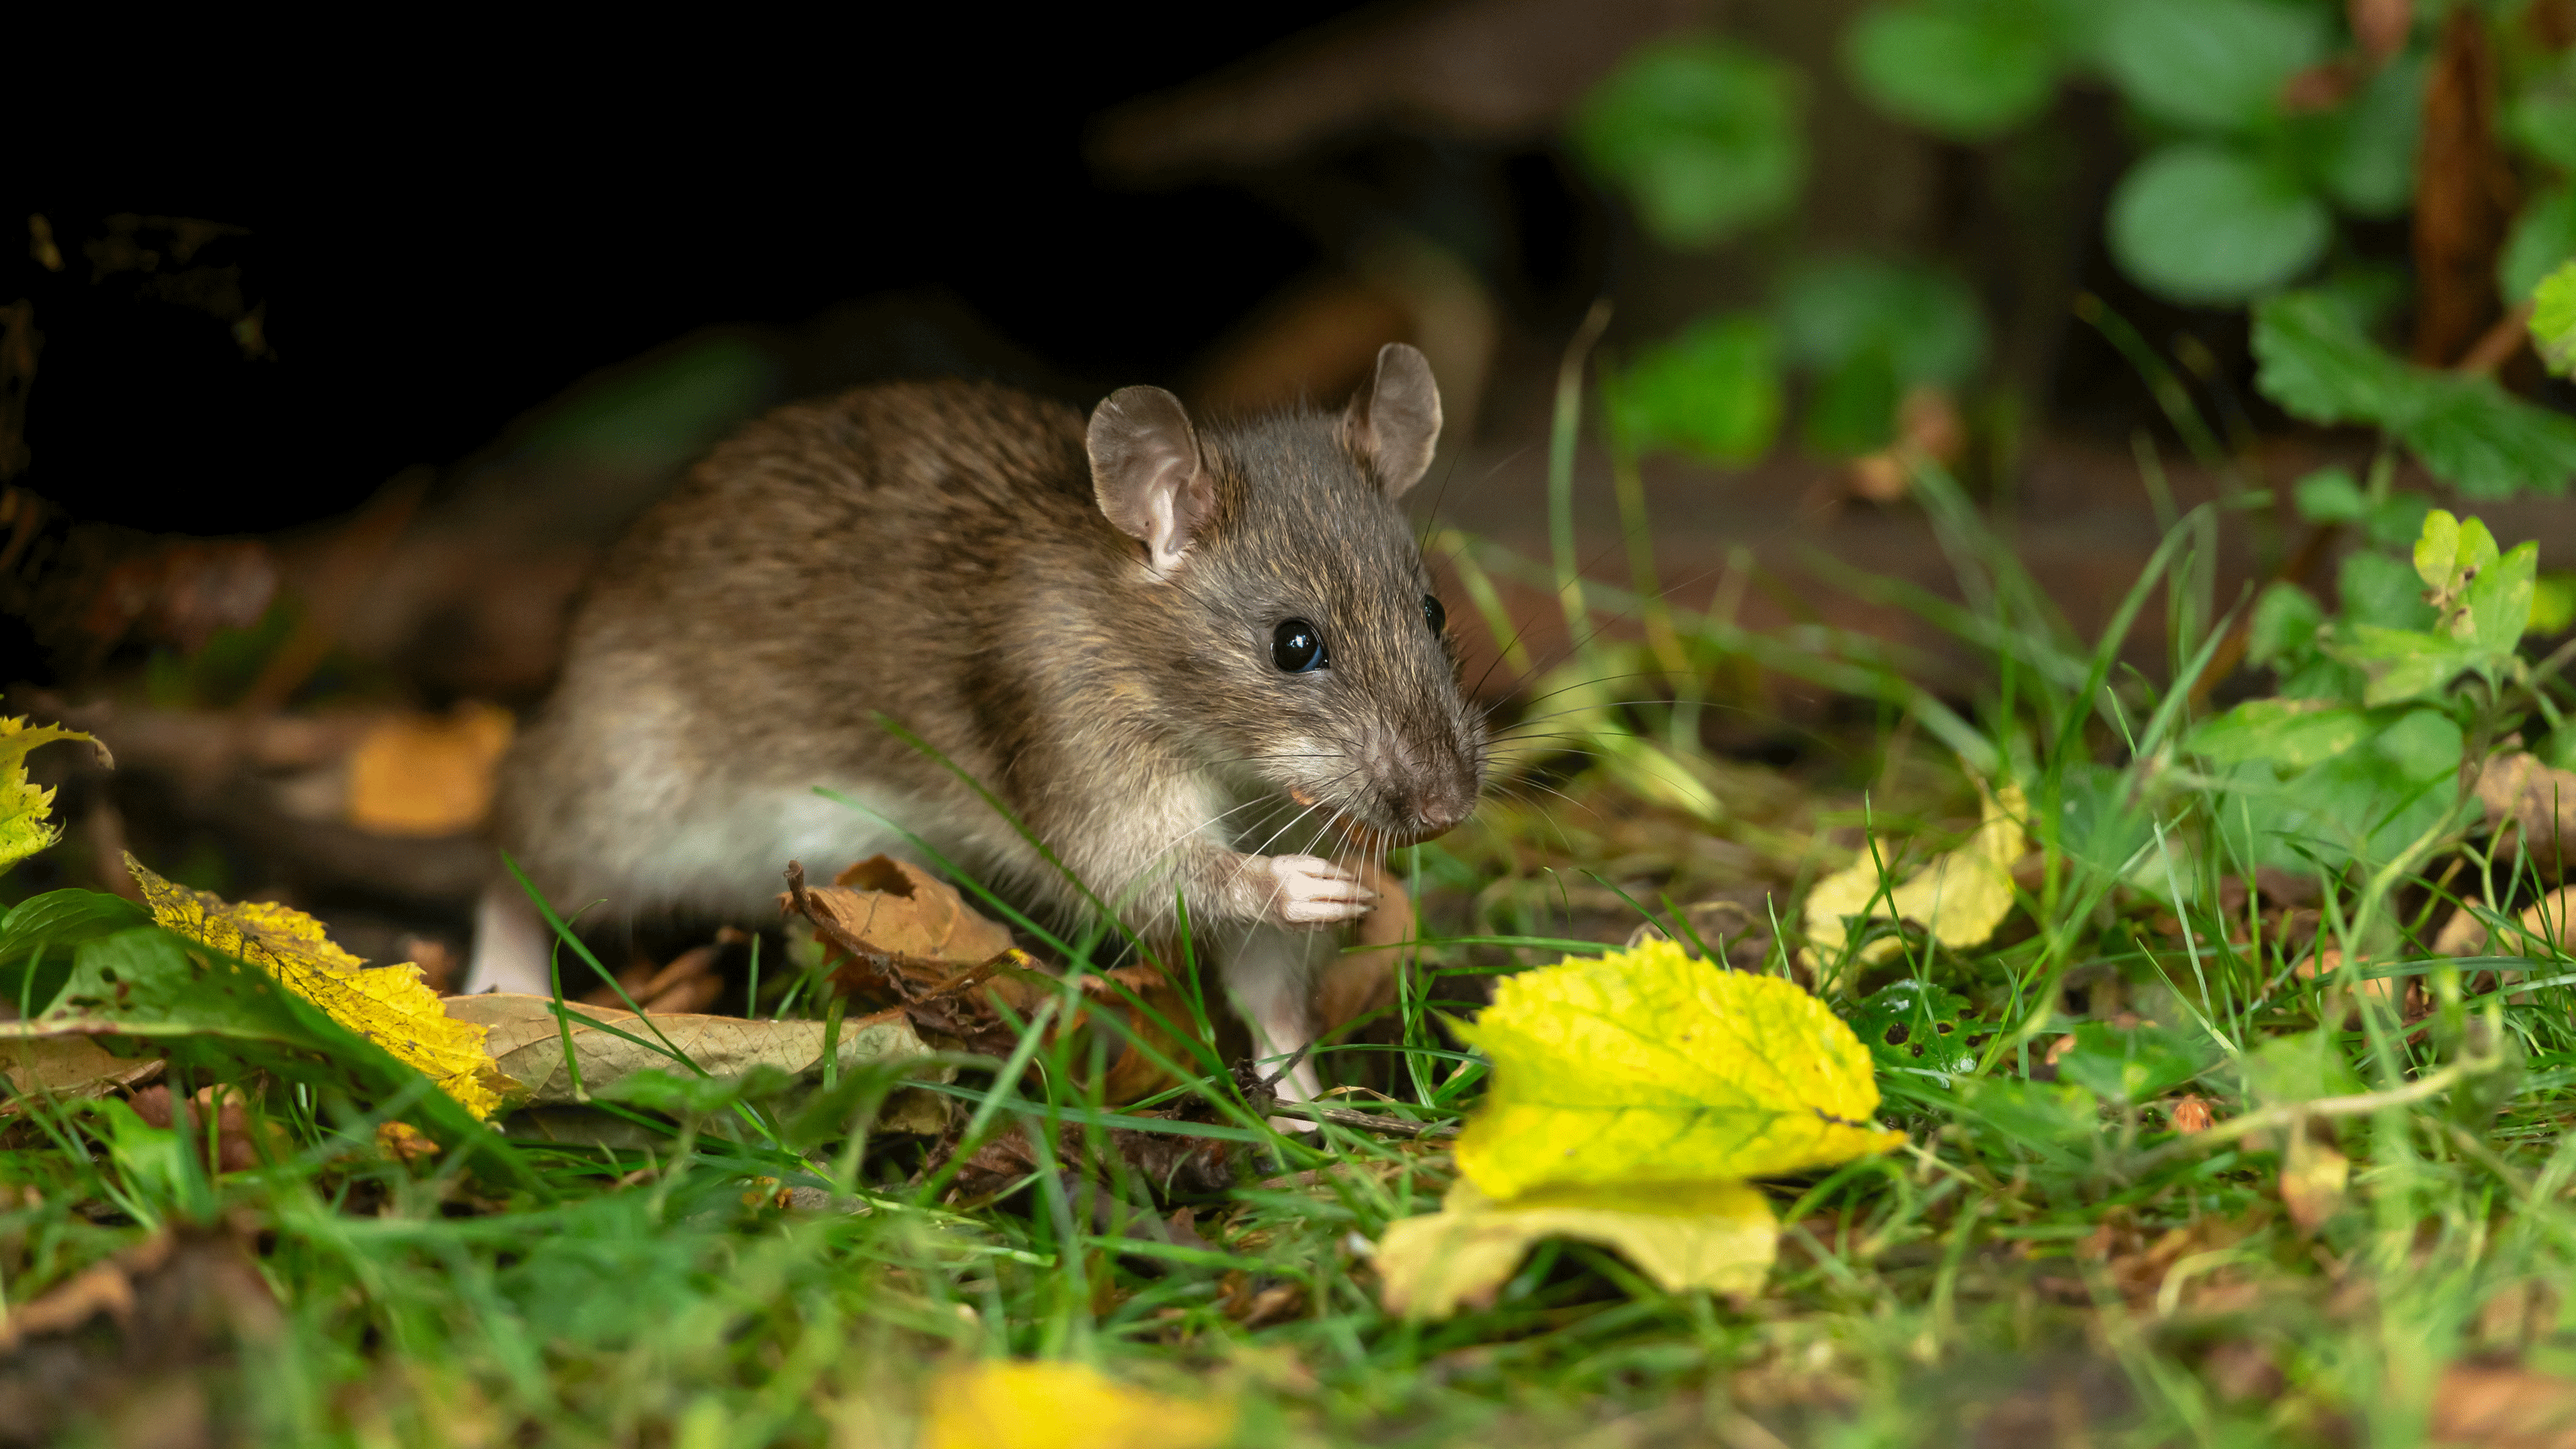 How to get rid of rats from your yard and prevent them from coming